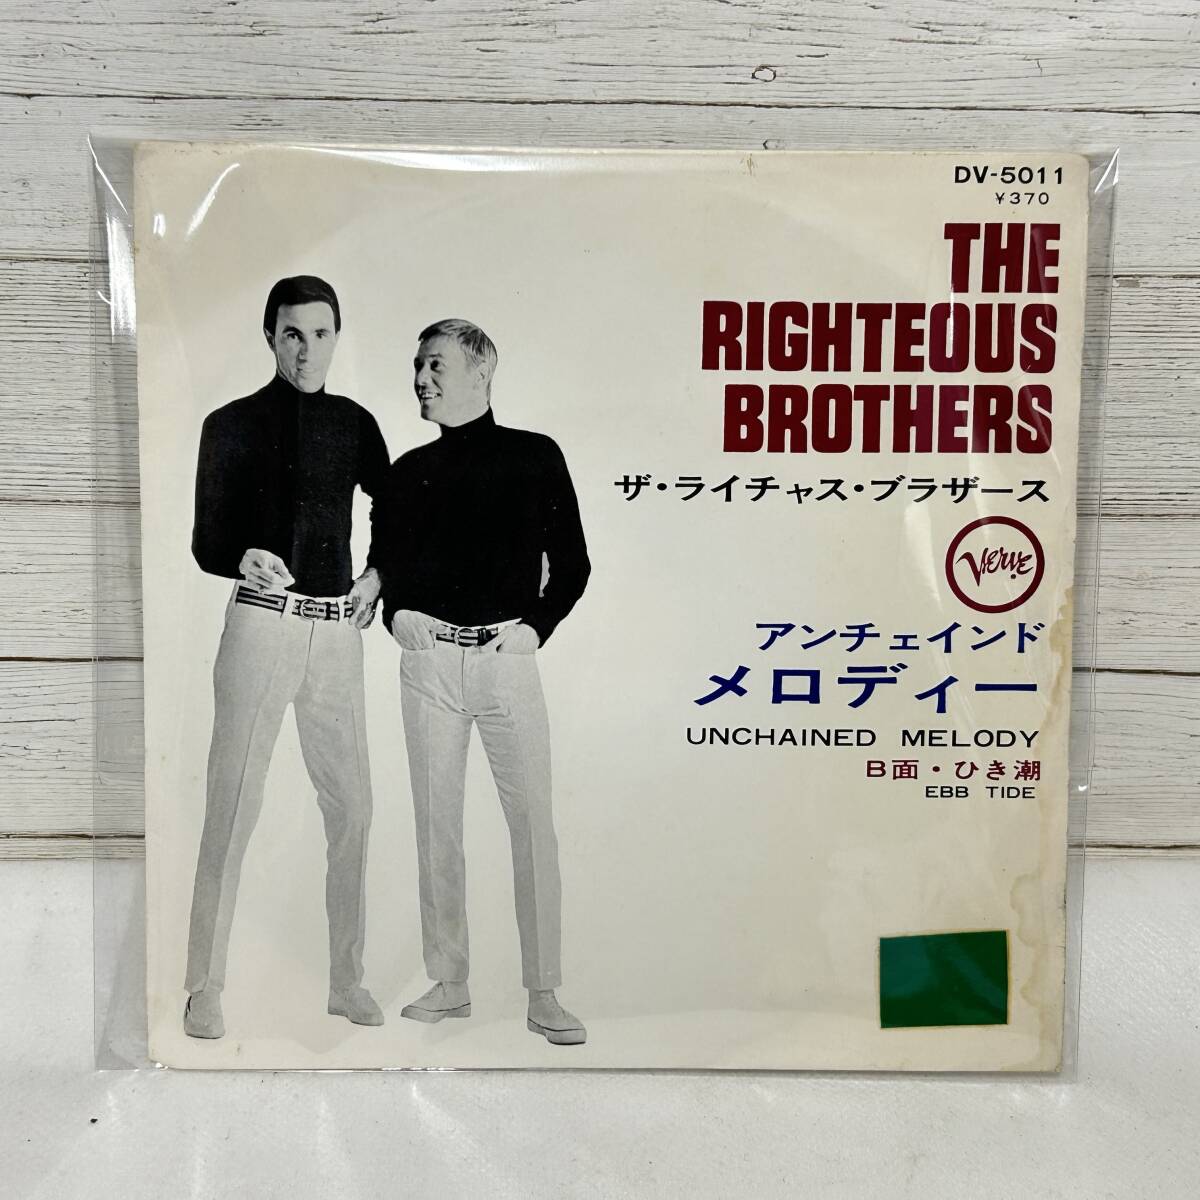 【11】EPレコード Righteous Brothers 「Unchained Melody/ Ebb Tide」国内盤 送料185円!_画像1